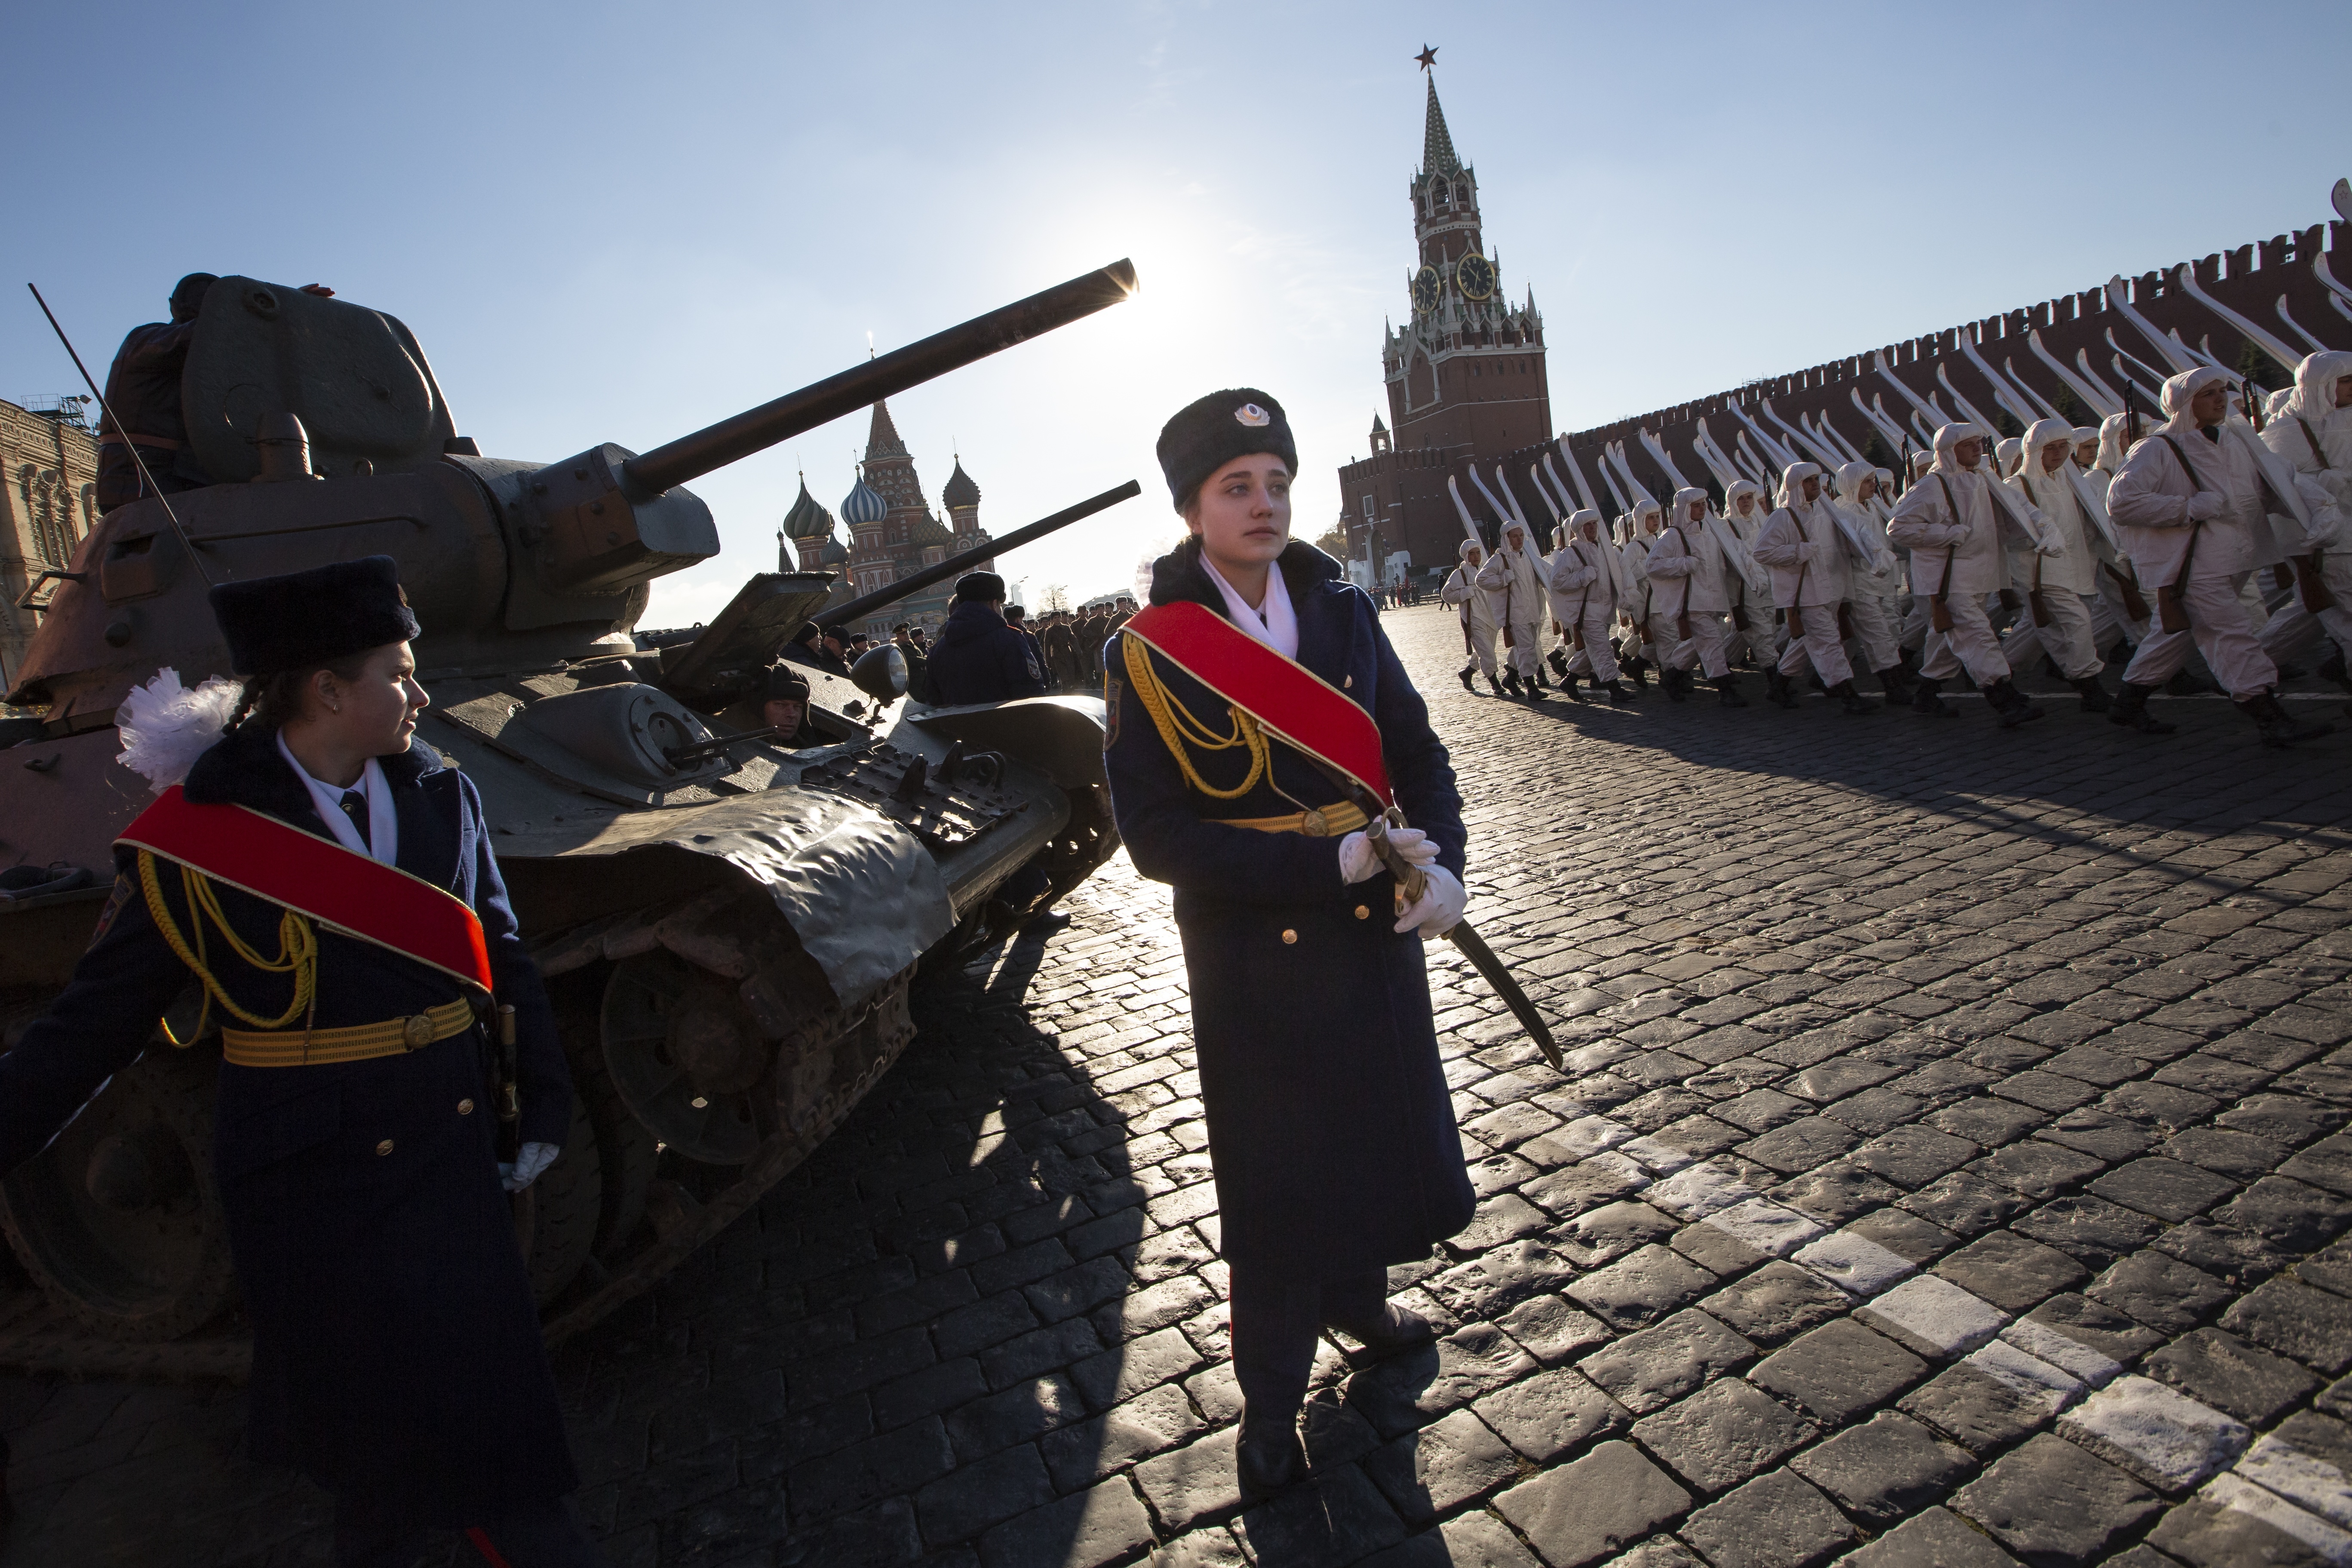 A Russian cadet stands in front of a legendary Soviet tank T-34 as other soldiers dressed in Red Army World War II uniforms march during a rehearsal of the Nov. 7 parade in Red Square, with St. Basil Cathedral and the Spasskaya Tower in the background, in Moscow, Russia, Monday, Nov. 5, 2018. The parade marks the 77th anniversary of a World War II historic parade in Red Square and honored the participants in the Nov. 7, 1941 parade who headed directly to the front lines to defend Moscow from the Nazi forces. (AP Photo/Alexander Zemlianichenko)